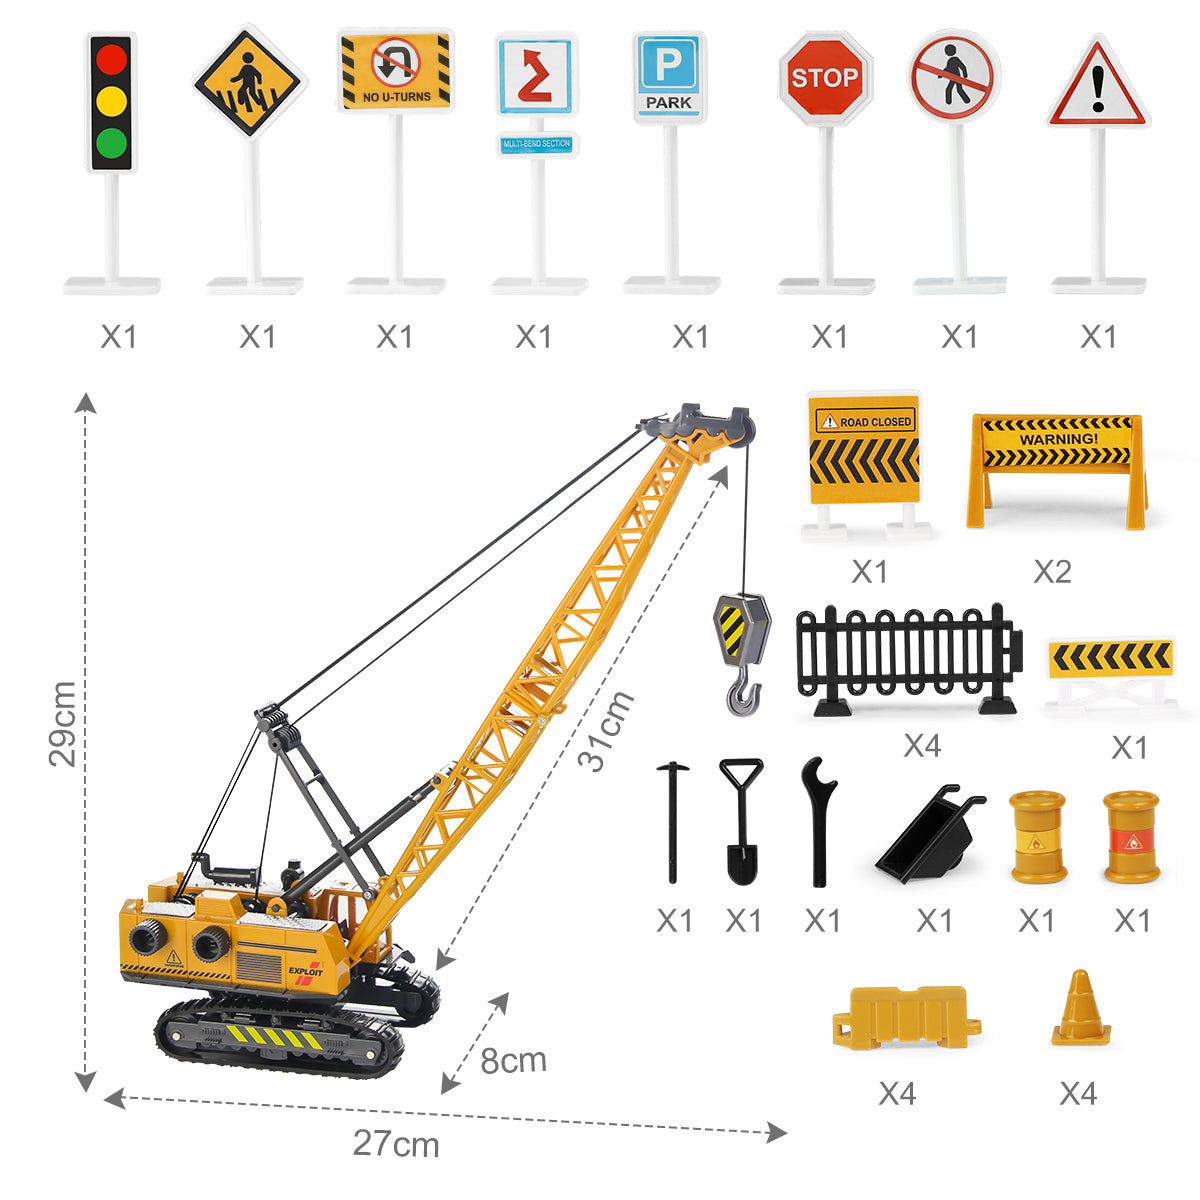 Joyfia 1: 55 Scale Crawler Crane with Operating Buttons, Kids Construction Crane Vehicle Model Alloy Car, Boys Engineering Outdoor Sandbox Truck Toys Playset, Gifts for 3-8 Years Old Toddlers